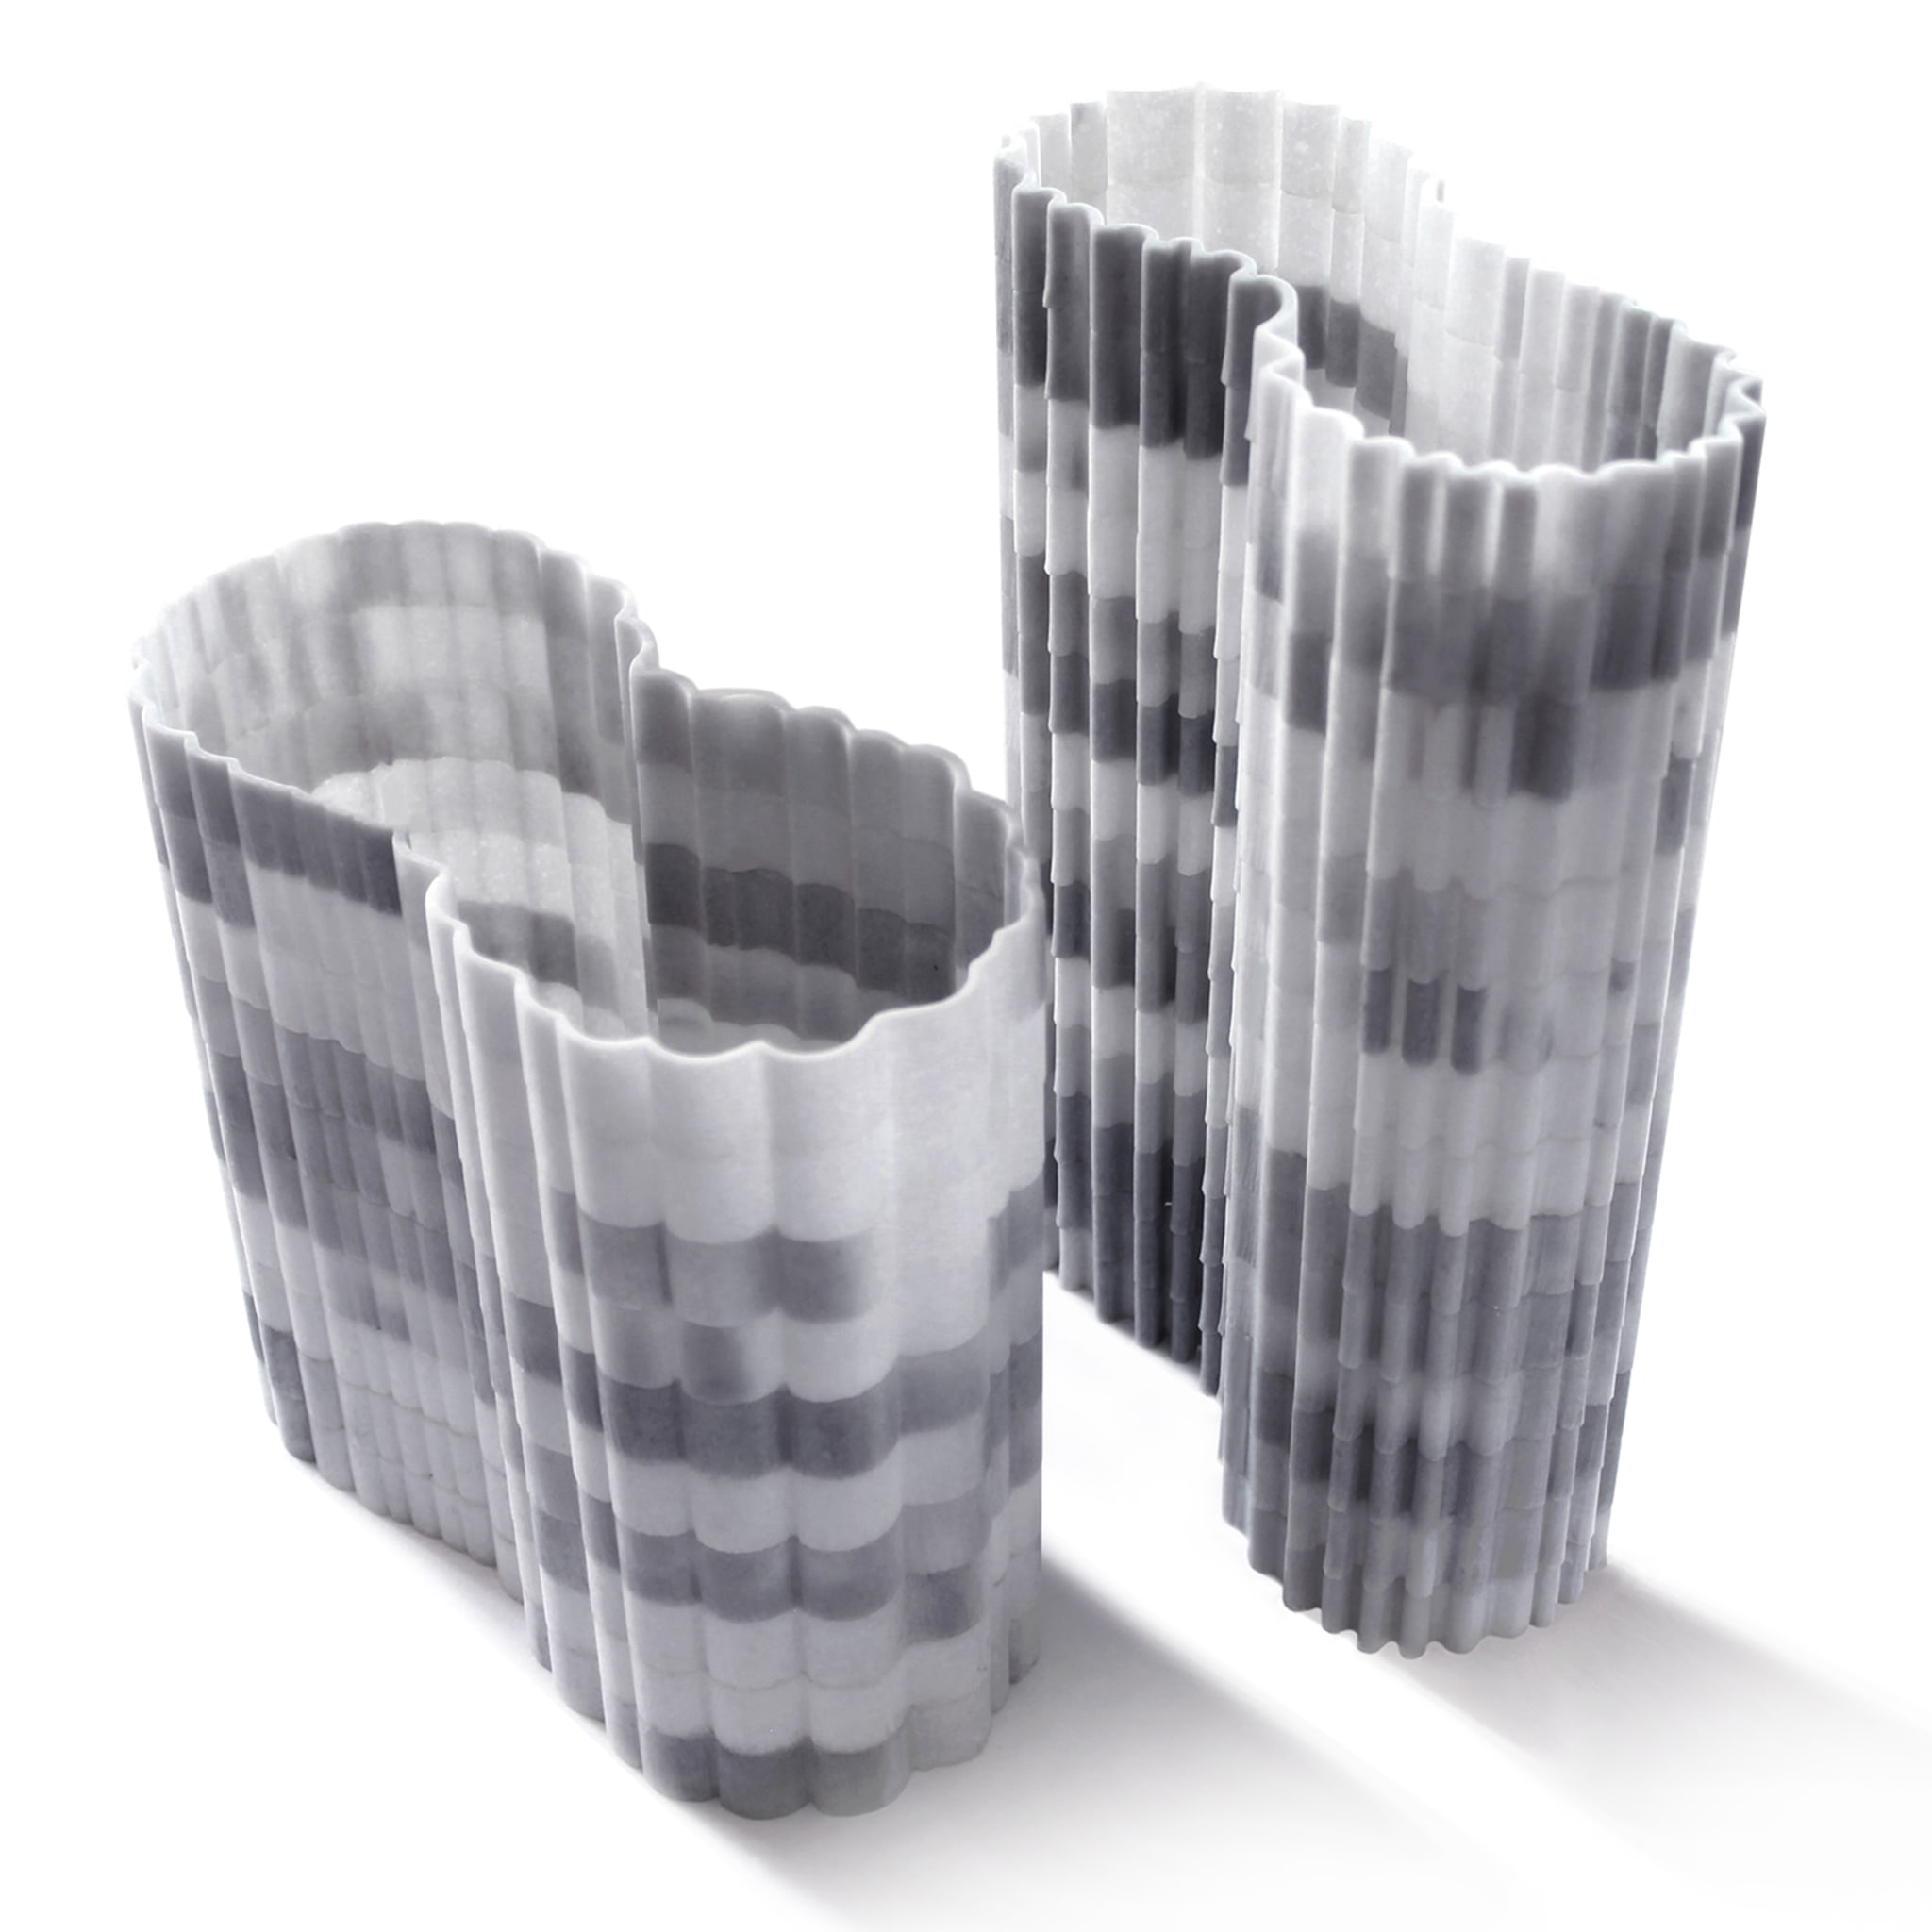 Stripes Vase Olimpic White Marble #1 by Paolo Ulian - Alternative view 1